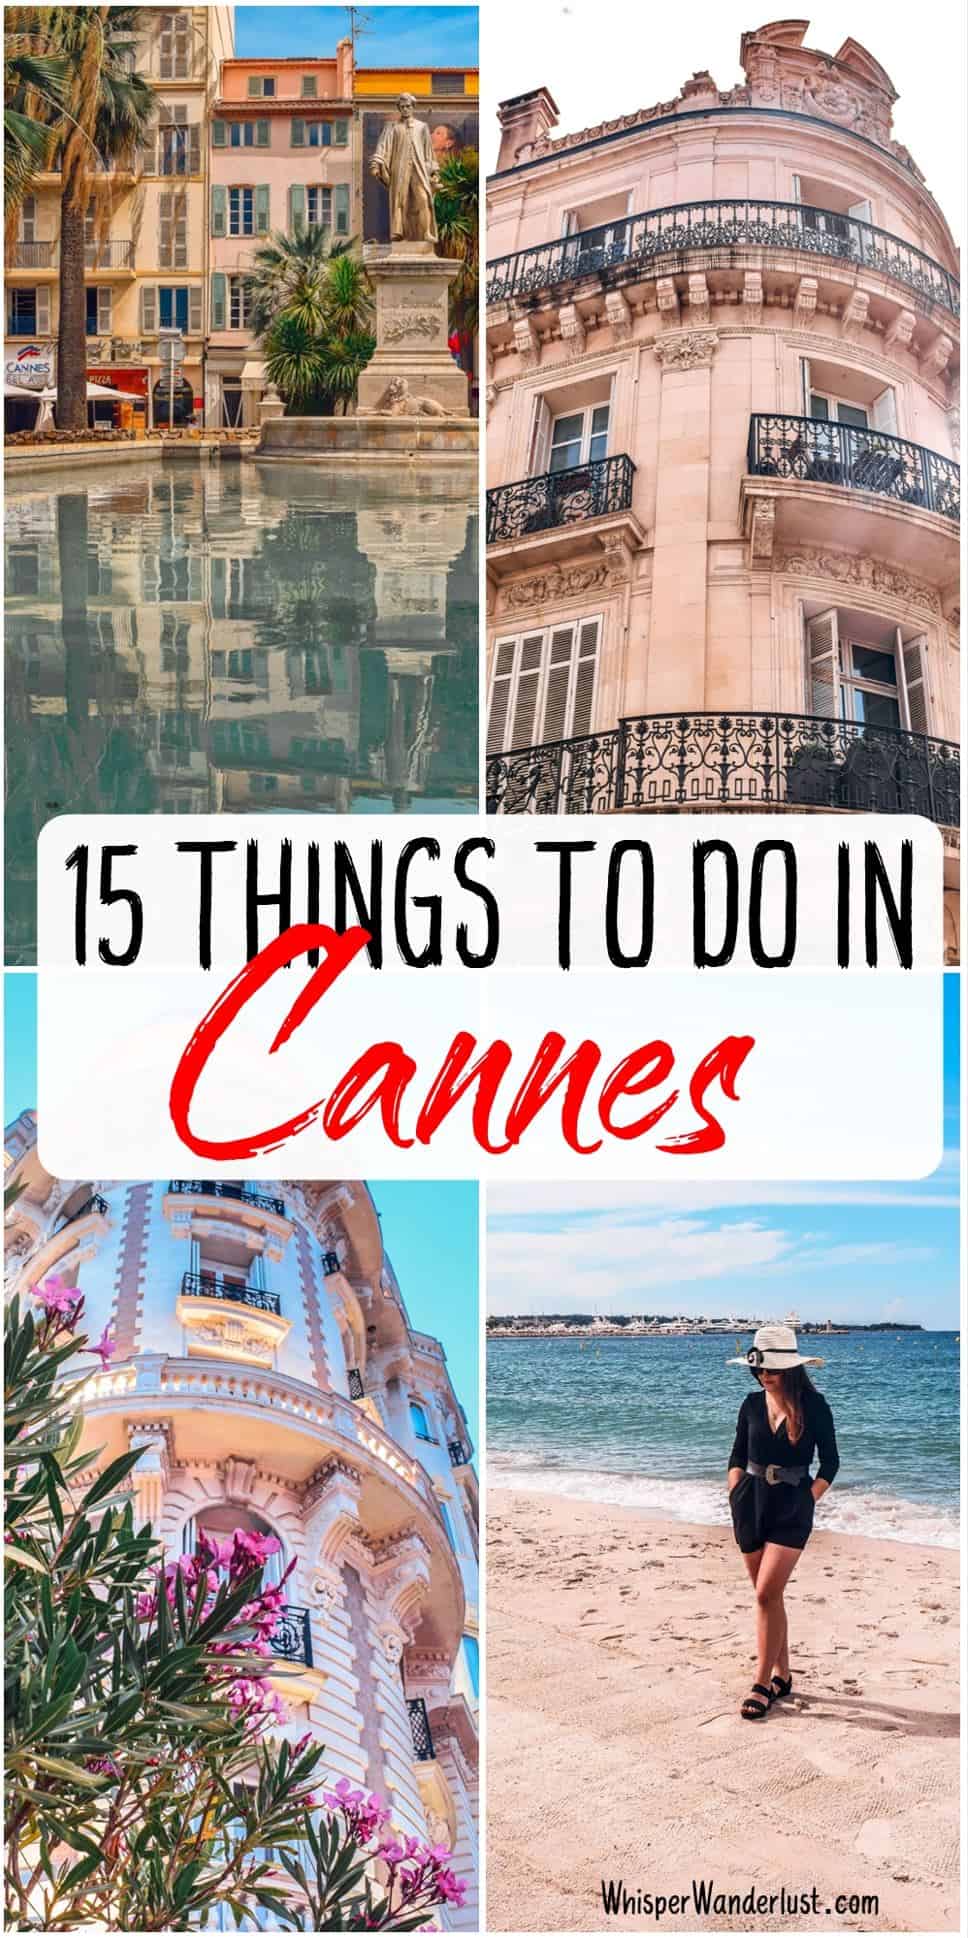 THINGS TO DO IN cannes | places to visit in cannes | reasons to visit cannes